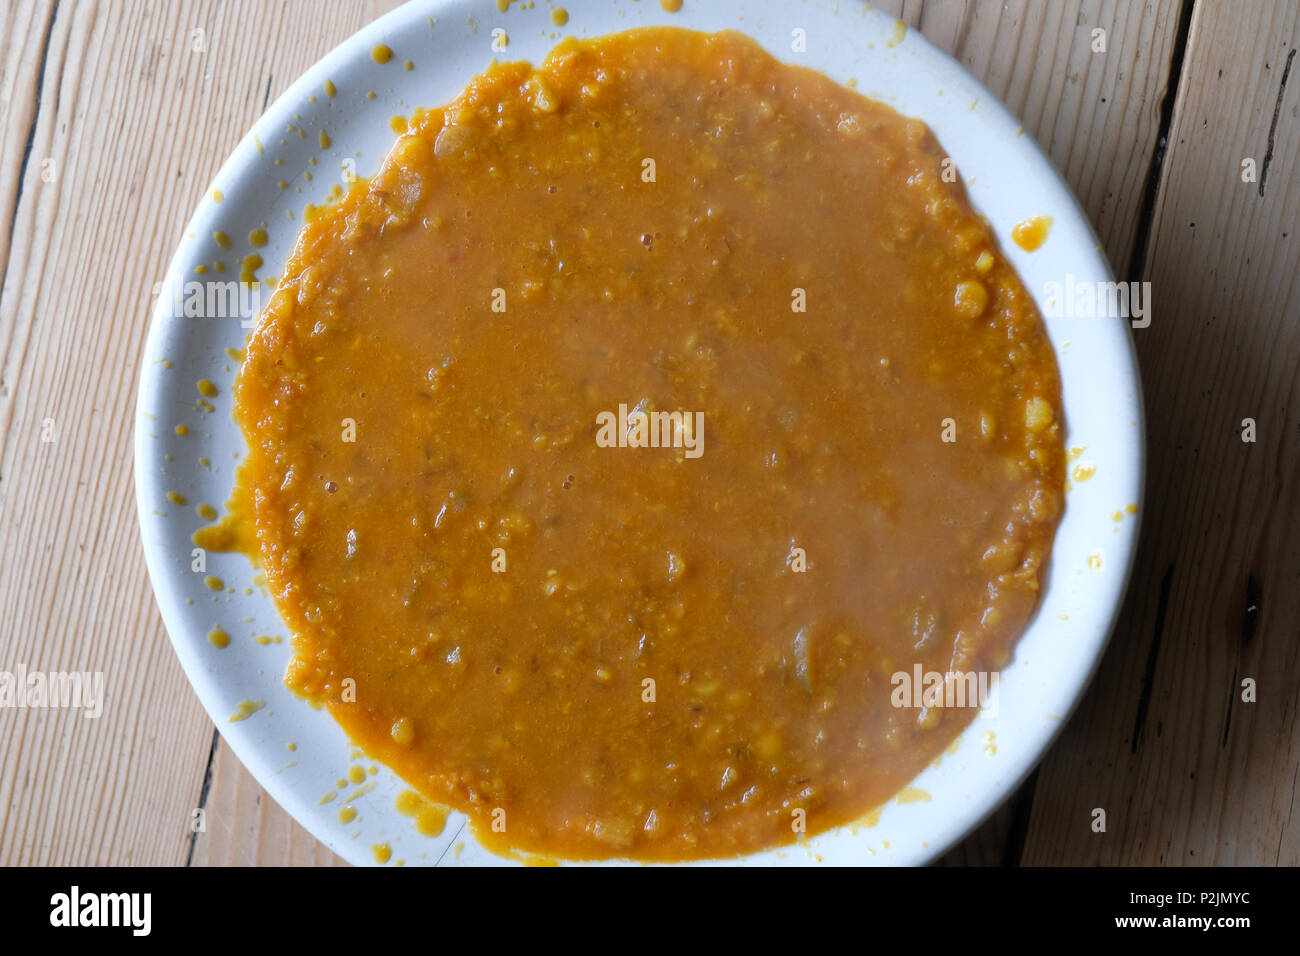 A bowl of badly poured soup. Stock Photo